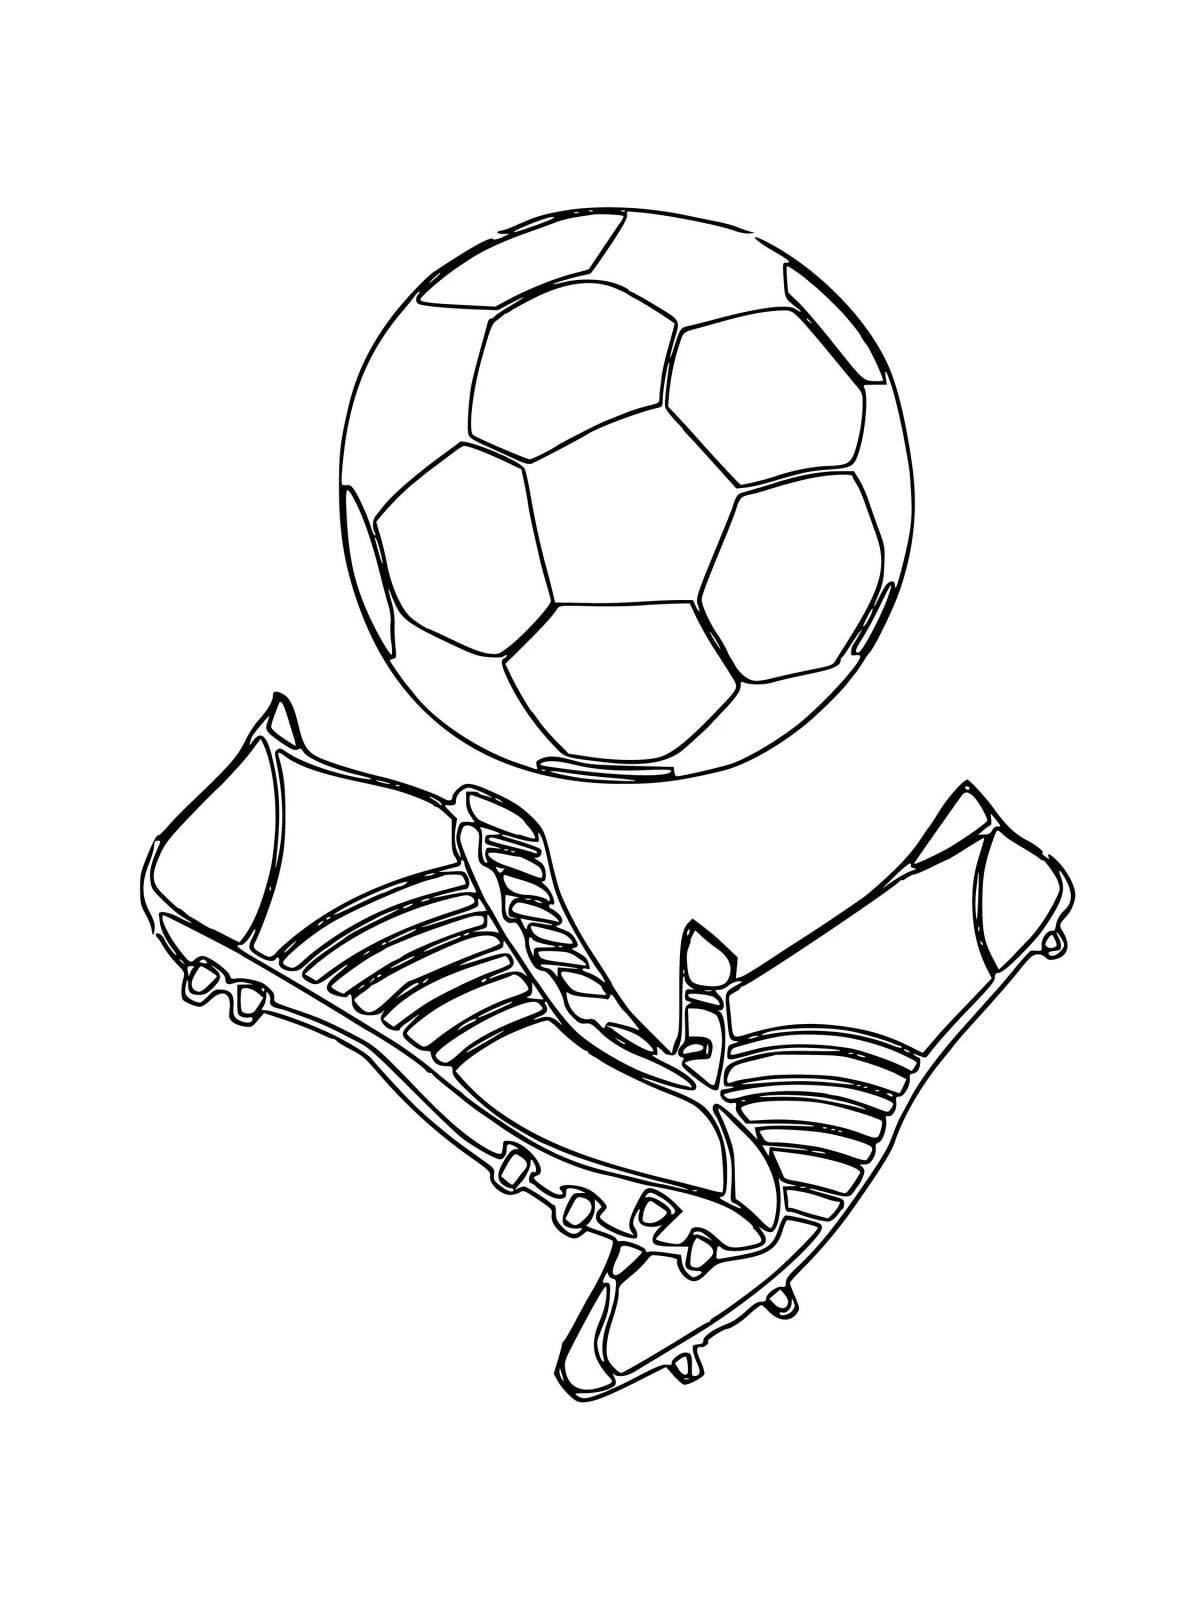 Amazing nike ball coloring page